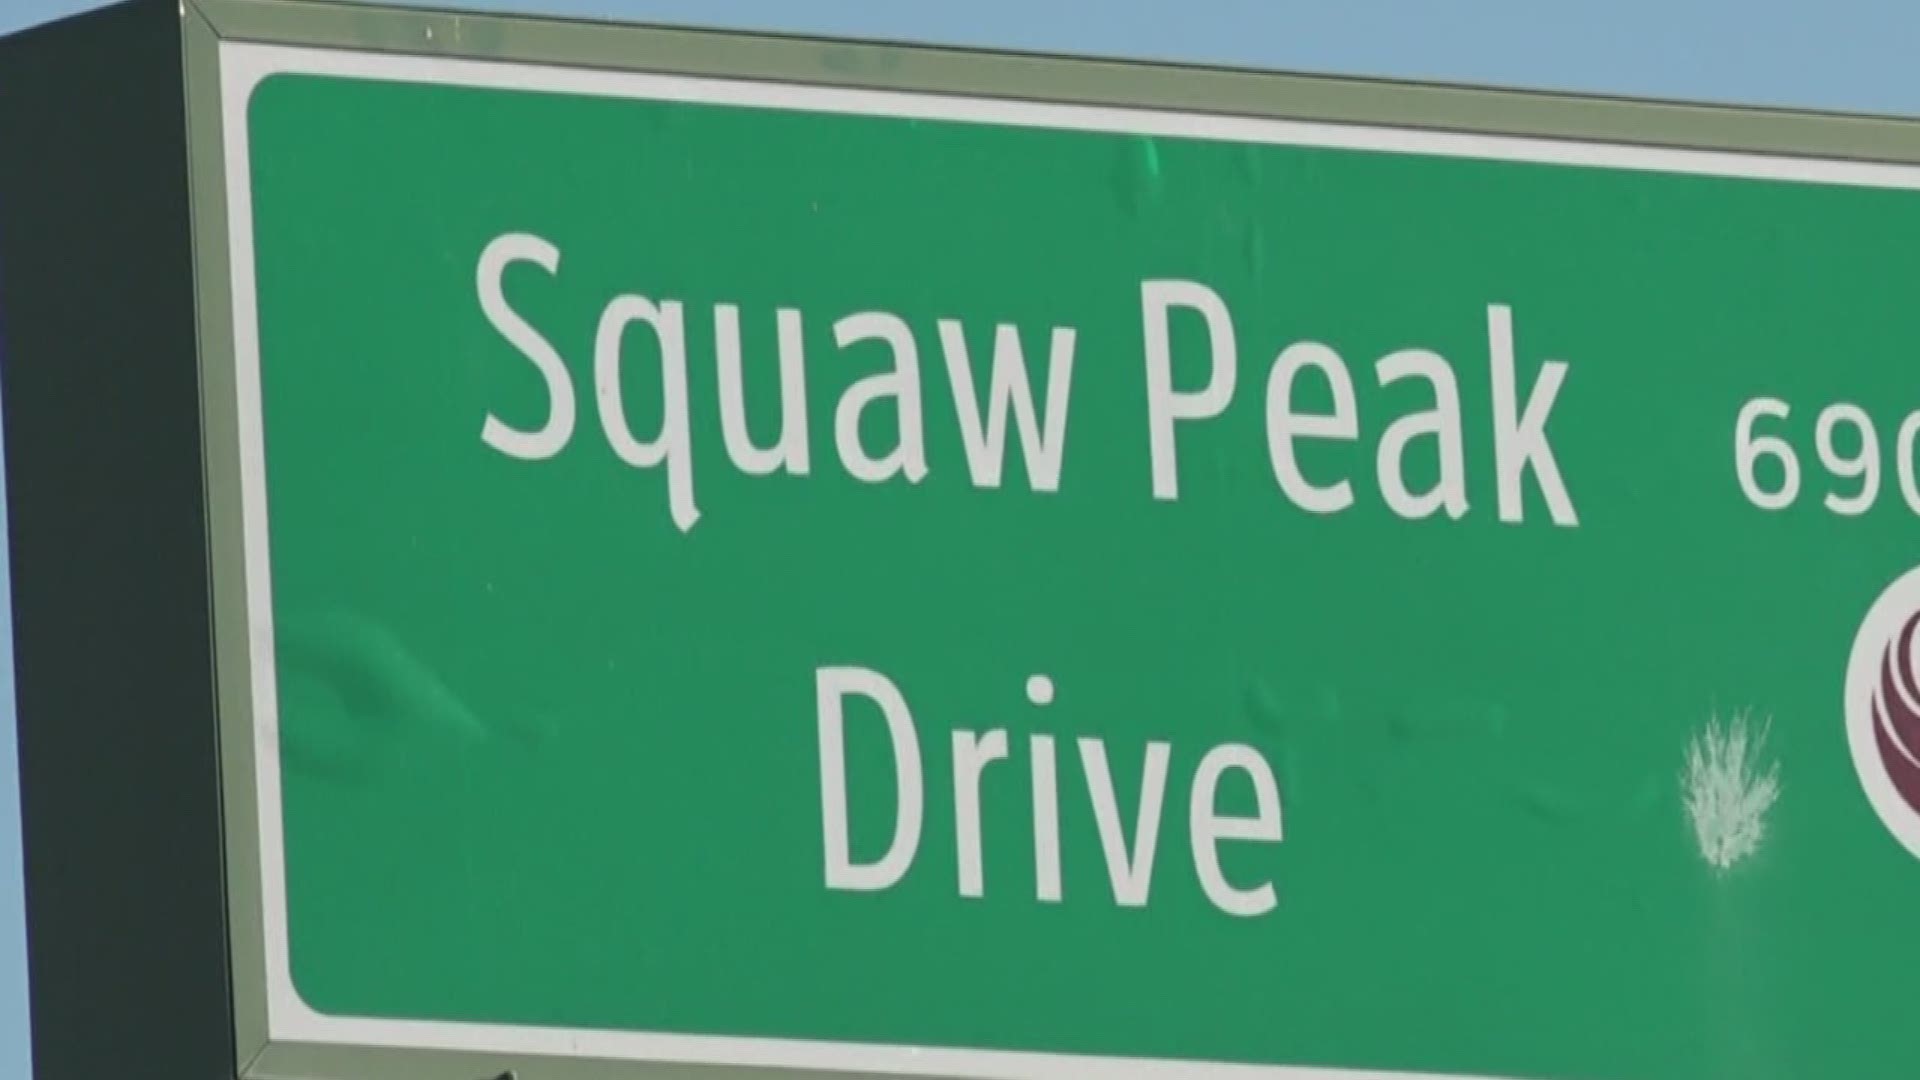 Though the name of the mountain has changed, Squaw Peak Drive kept its name.